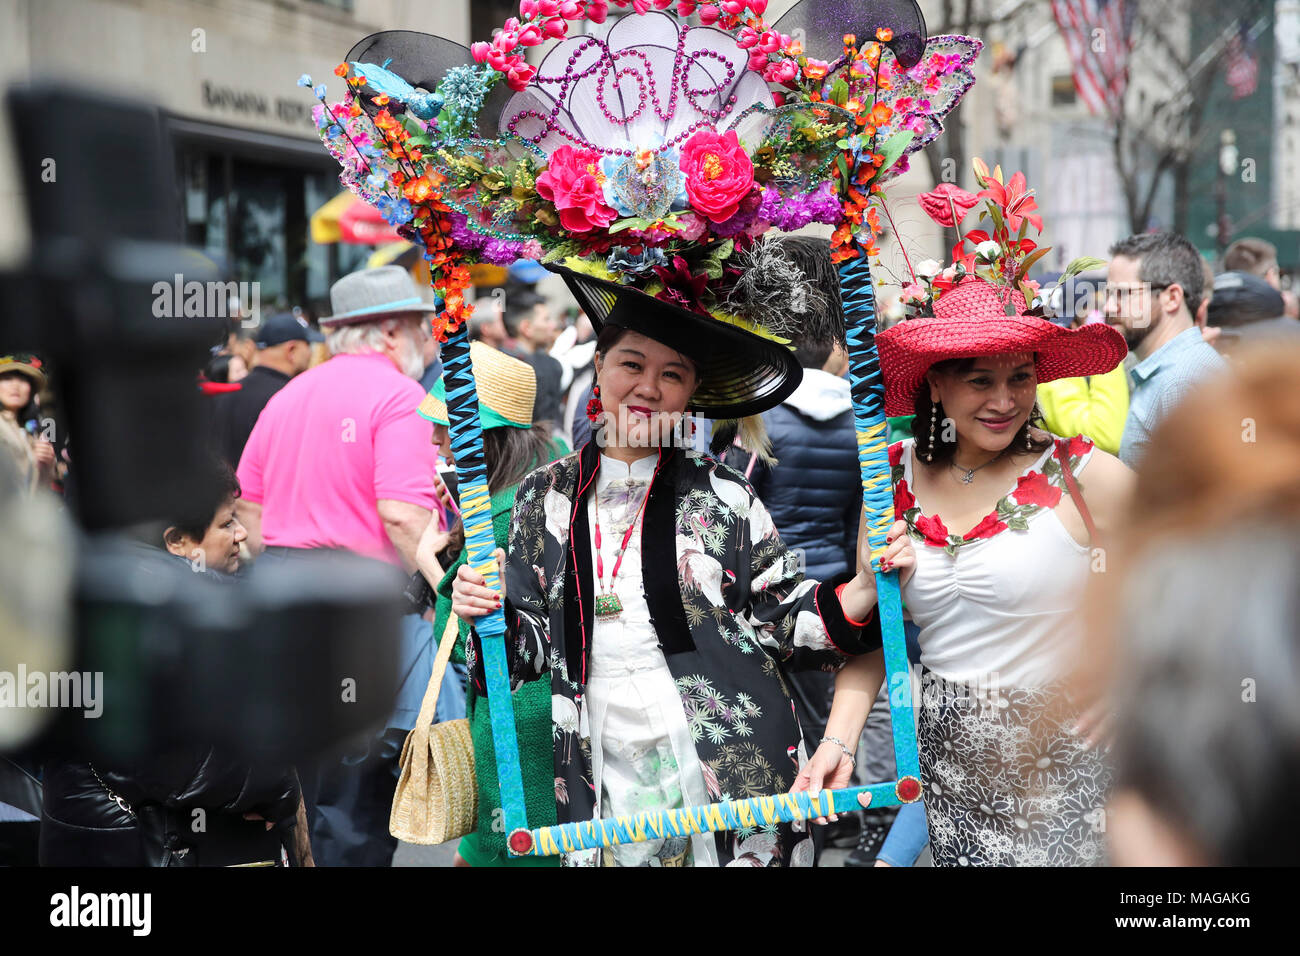 New York, USA. 1st Apr, 2018. Women in decorative bonnets take part in the Easter  Bonnet Parade in New York, the United States, April 1, 2018. The annual Easter  Bonnet Parade took